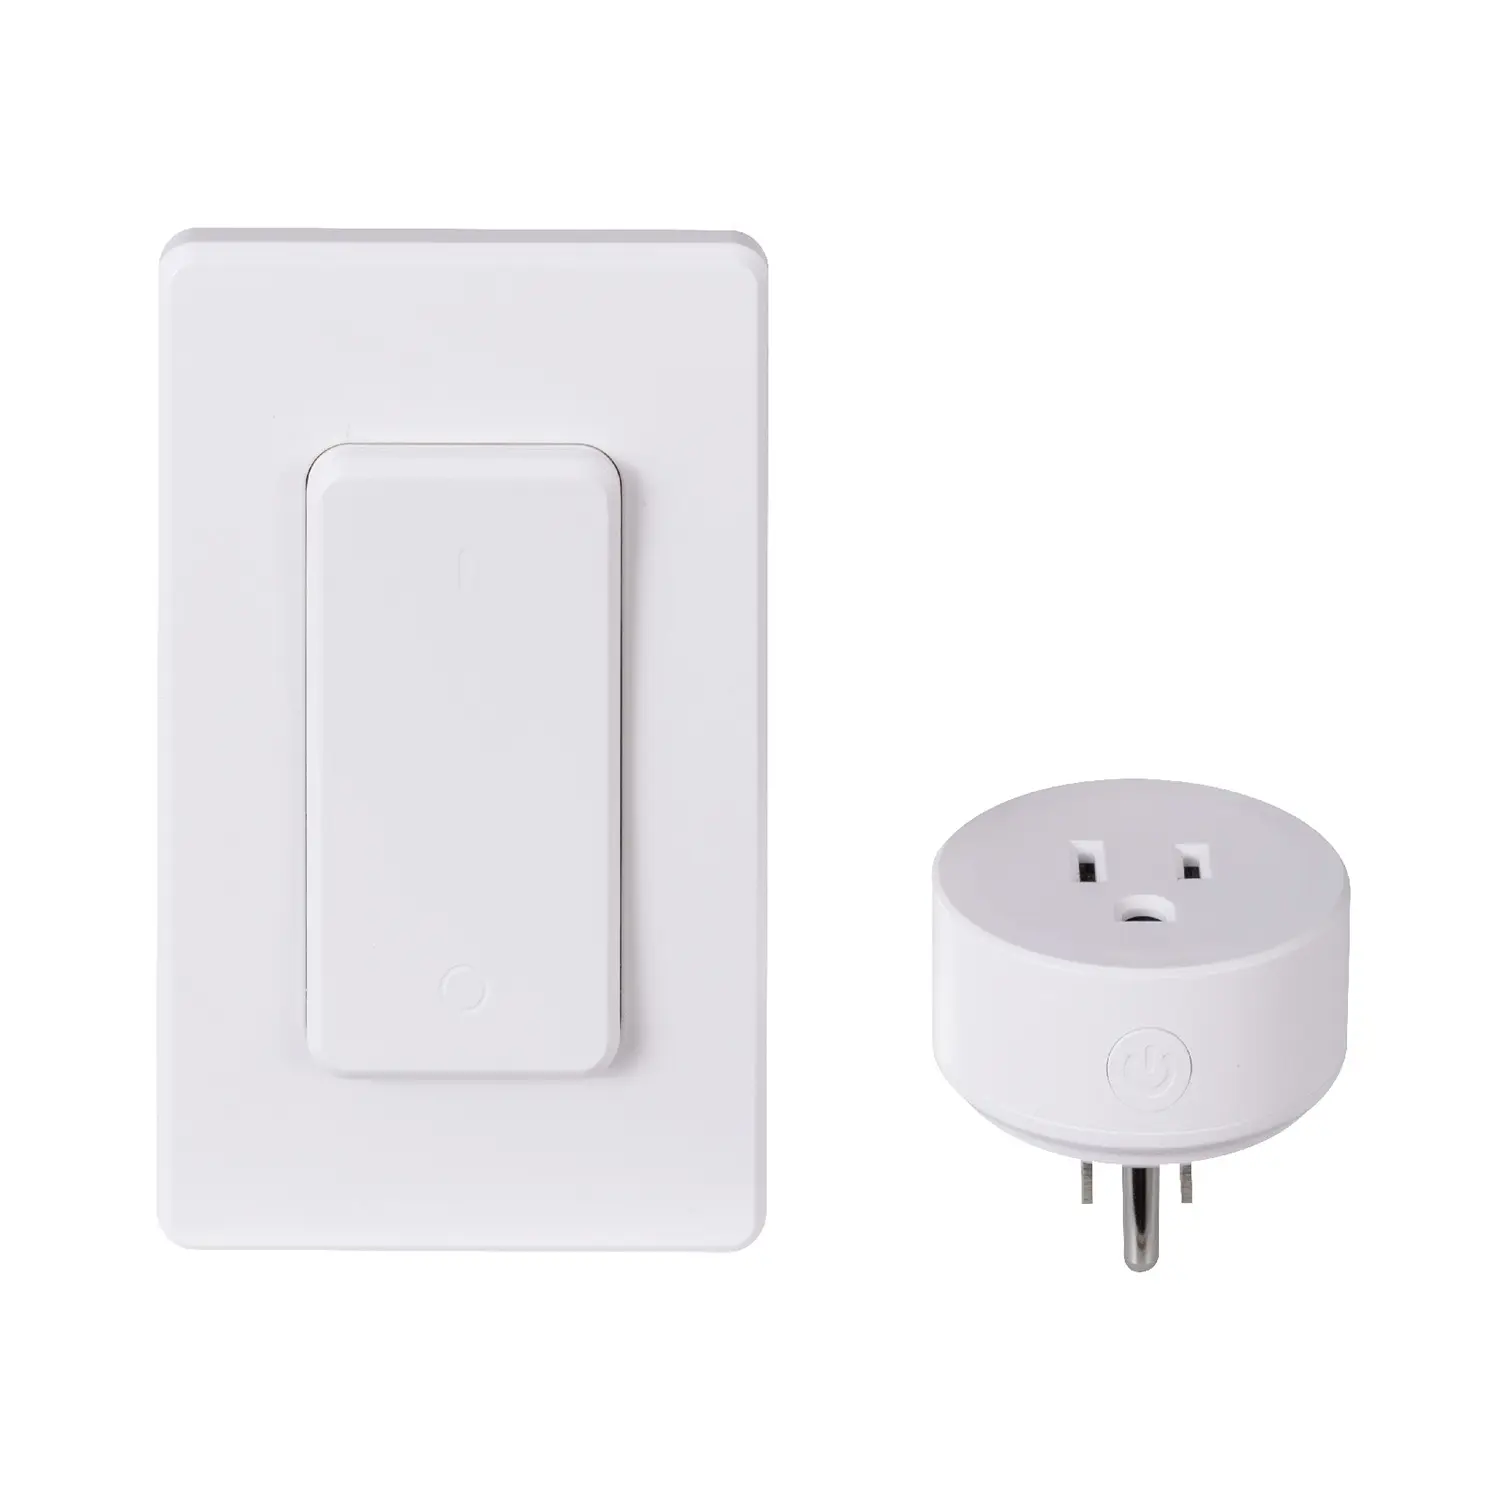 Hot Sale sockets and switches electrical smart plug with remote control smart power socket plug